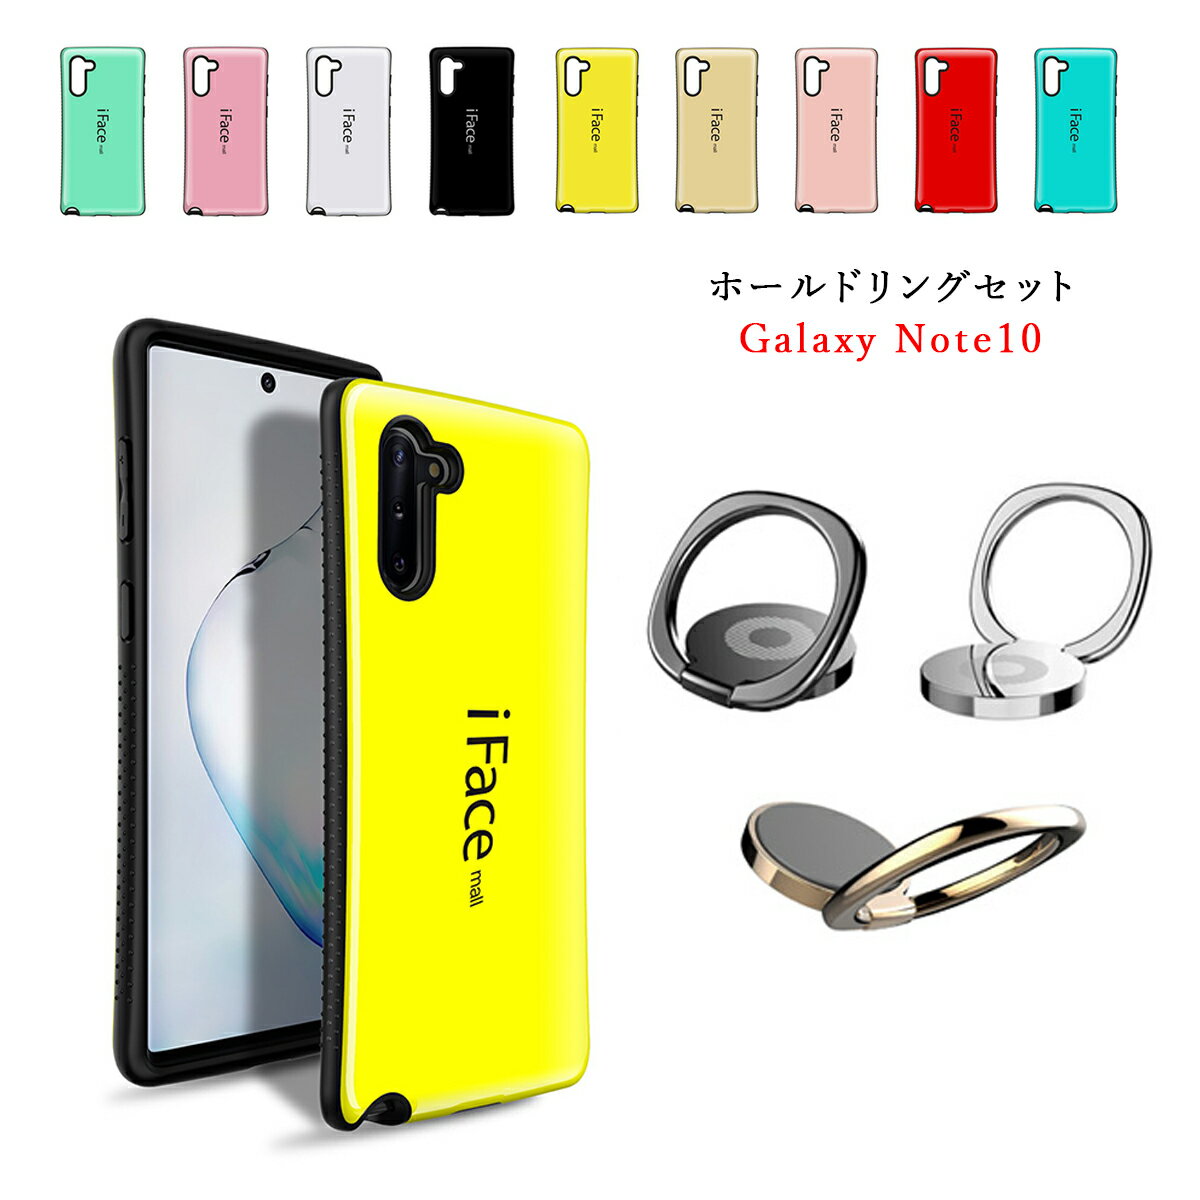  iFace mall ケース  ifacemall Galaxy Note10 ケース Galaxy note 10 ケース ギャラクシー note10 ケース note 10 ケース ギャラクシー ノート10 ケース ギャラクシー ノート 10 ケース